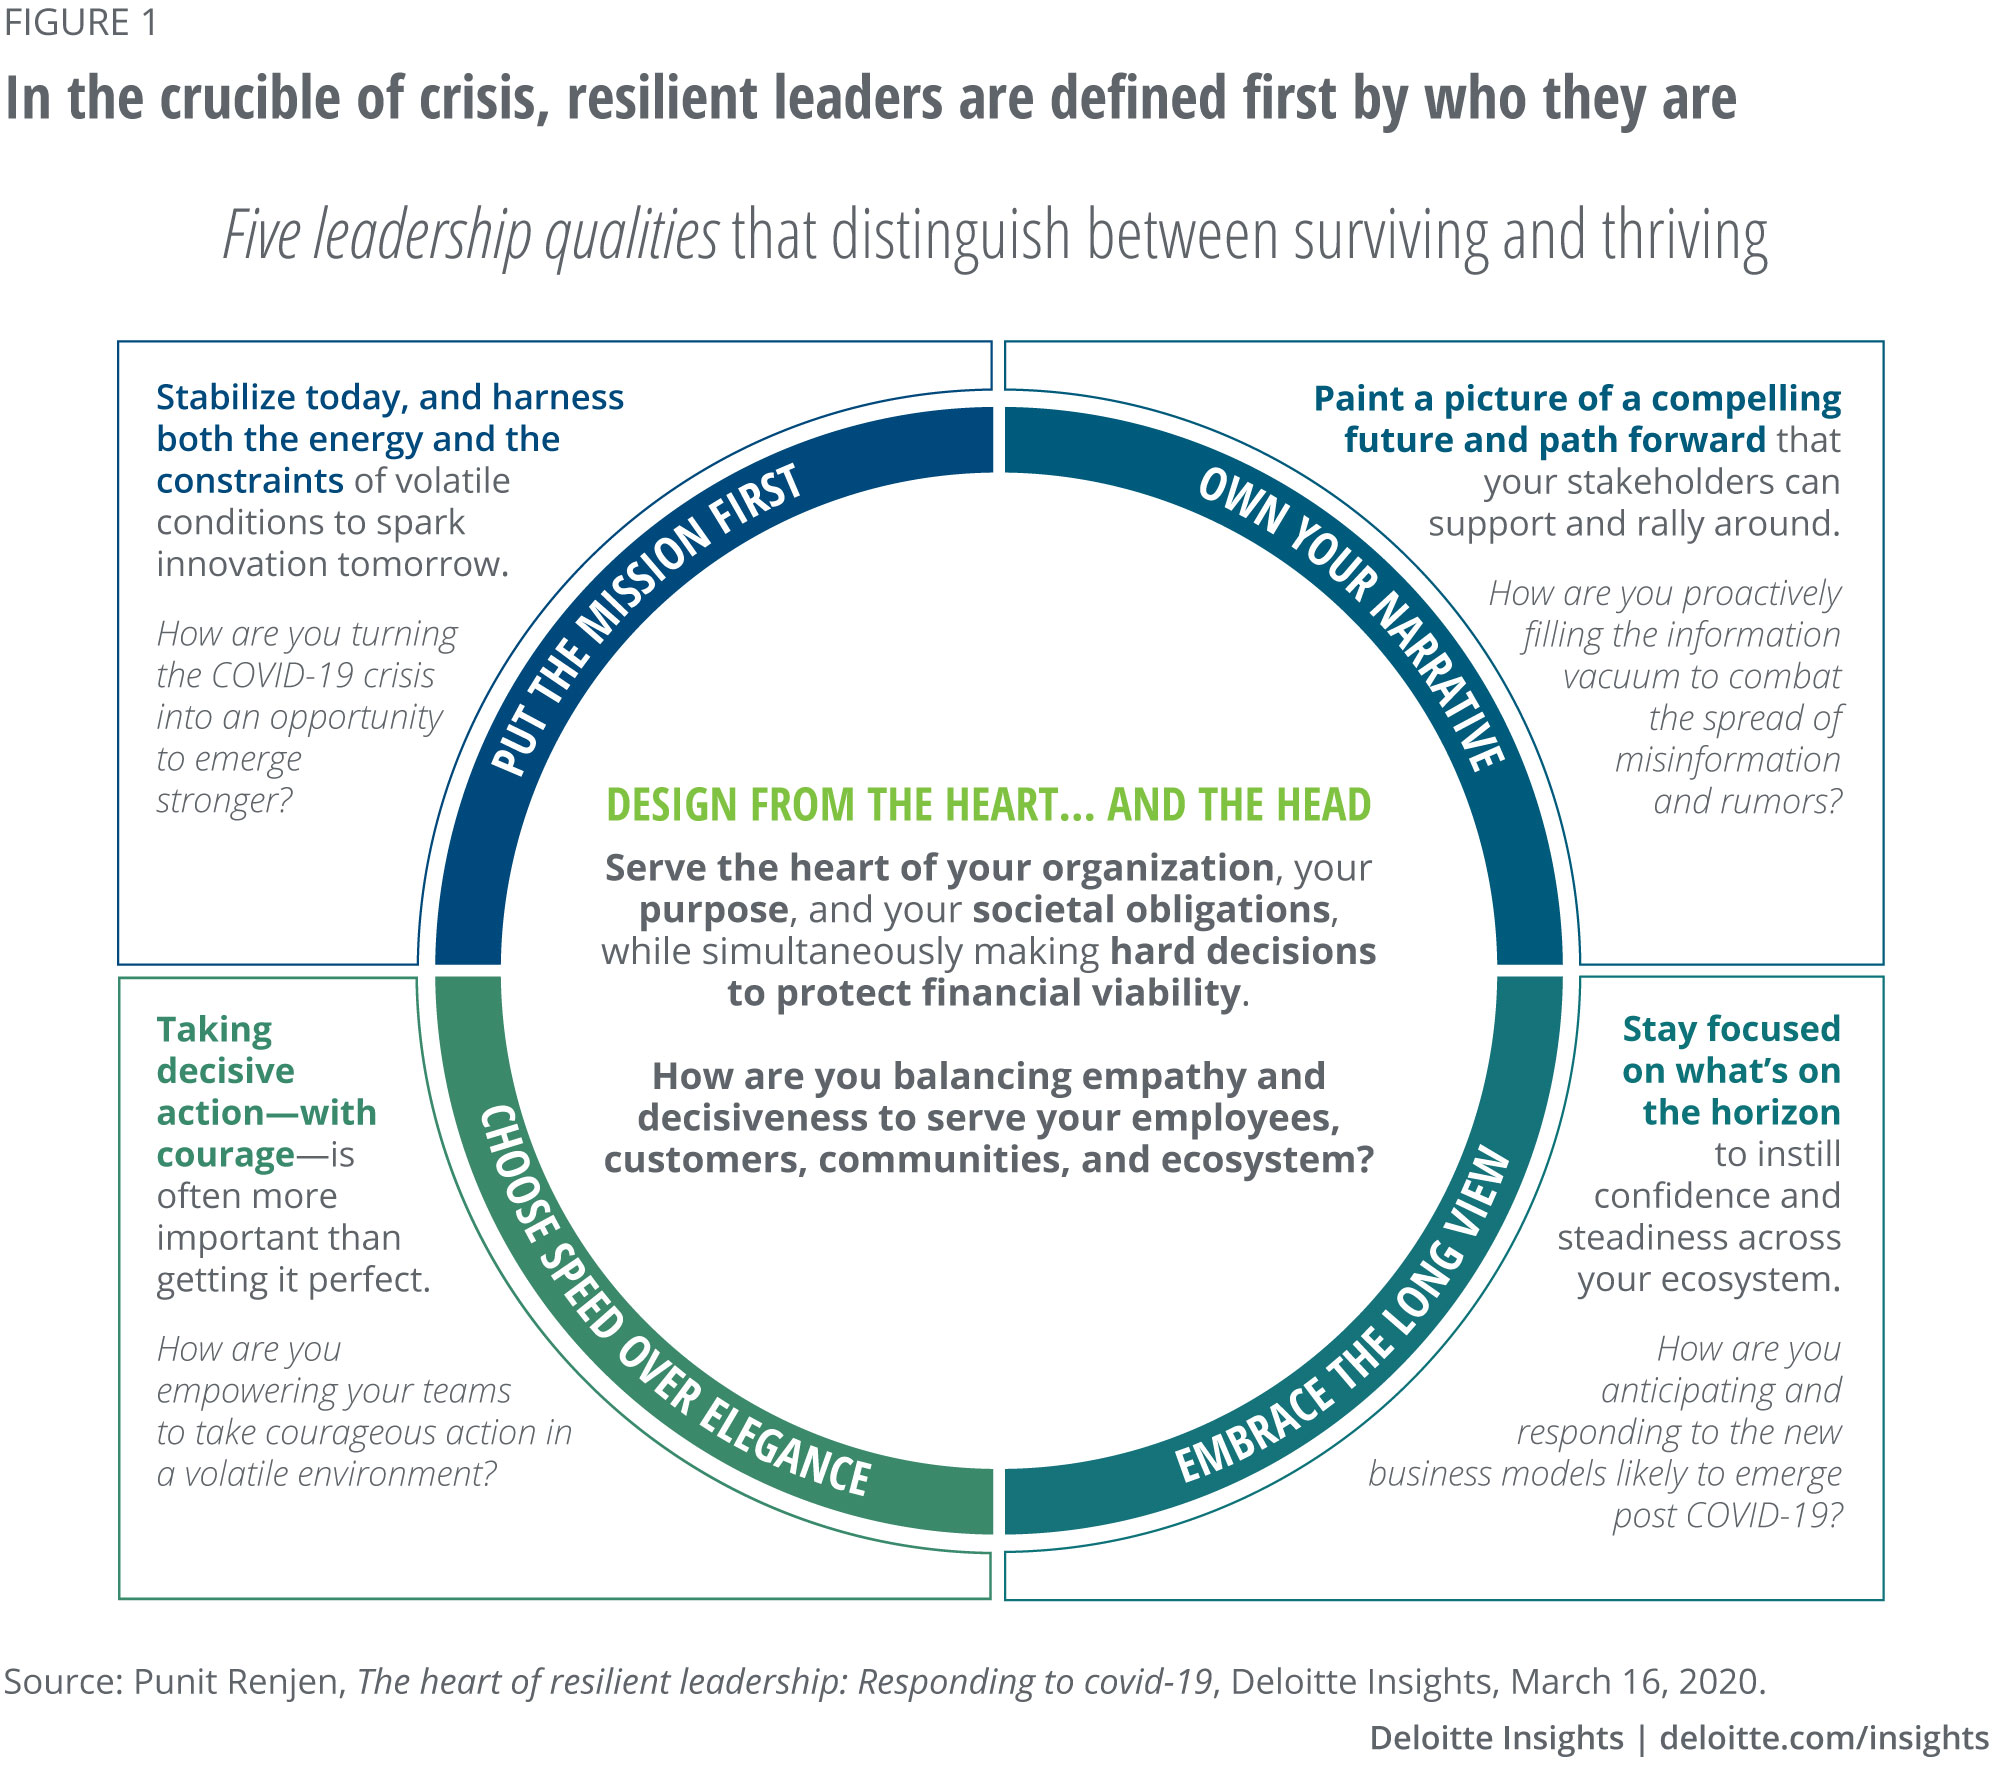 Resilient leadership qualities to manage through a crisis